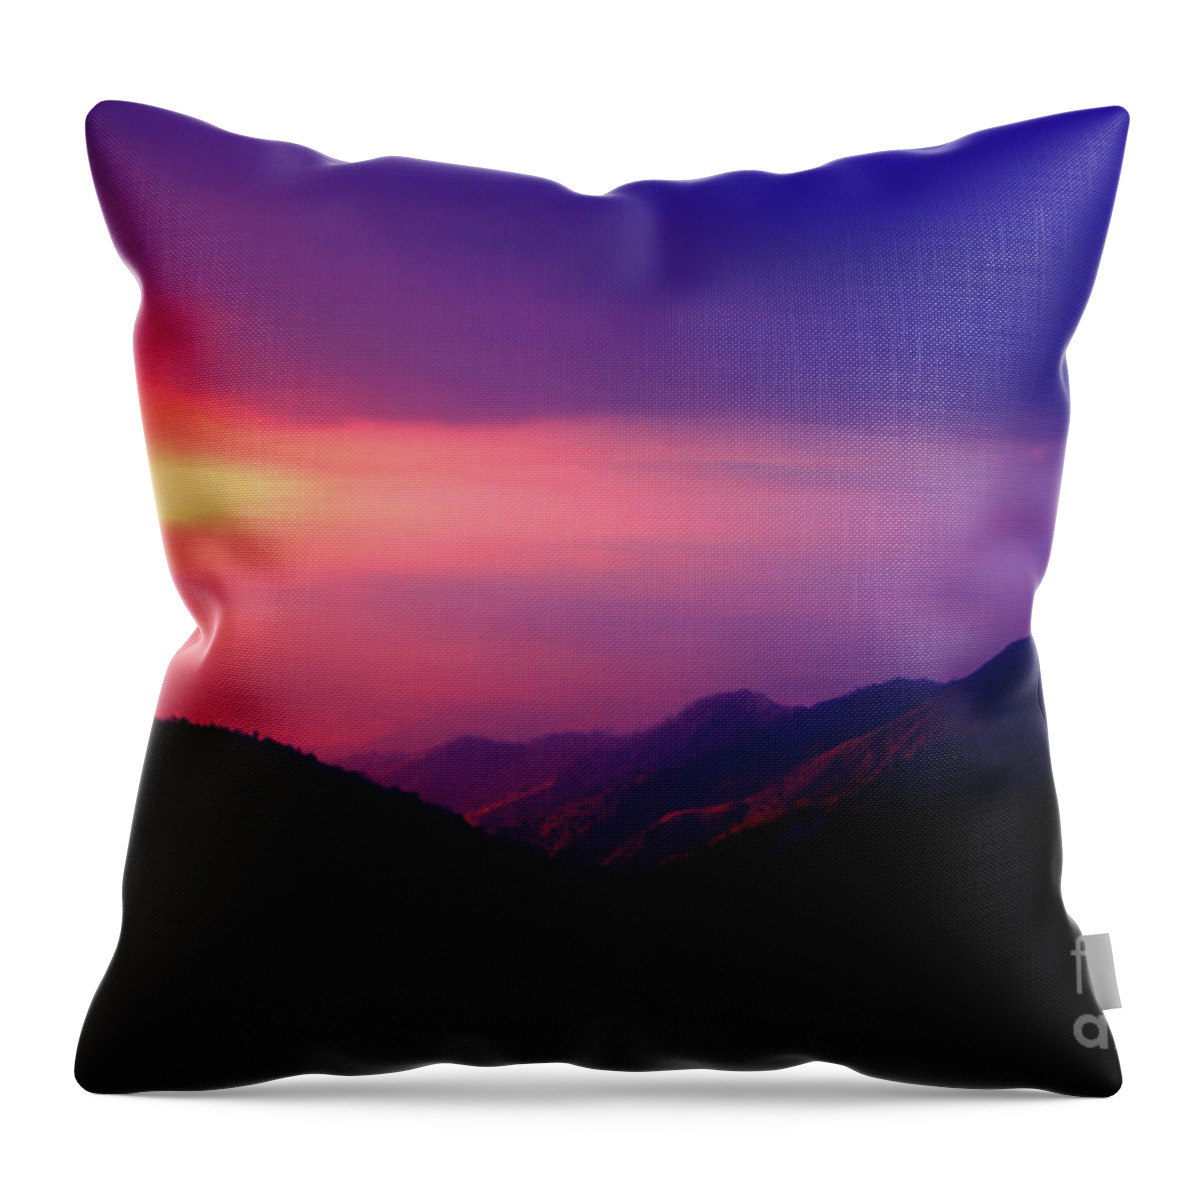 2218 Throw Pillow featuring the photograph Another Sunset In The Cajas Range Of The Andes by Al Bourassa